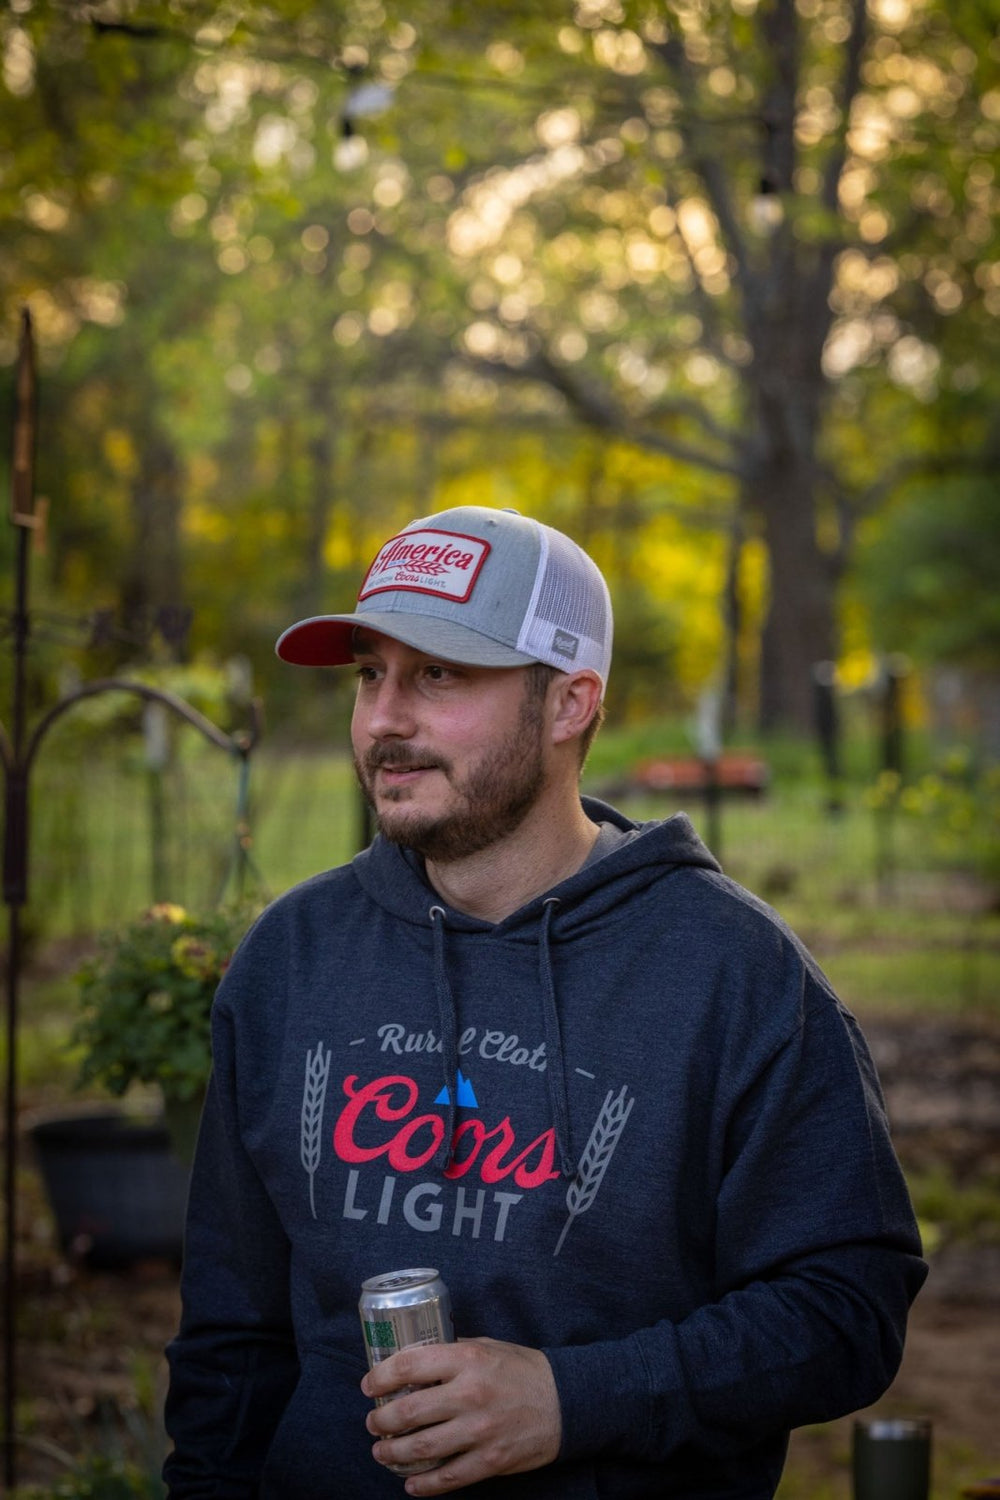 A man wearing a heather navy RC x CL Pullover by Rural Cloth, featuring the Coors Light logo, and a red and white cap stands outdoors. He holds an American beer can in his left hand as the background shows a garden with greenery and trees.